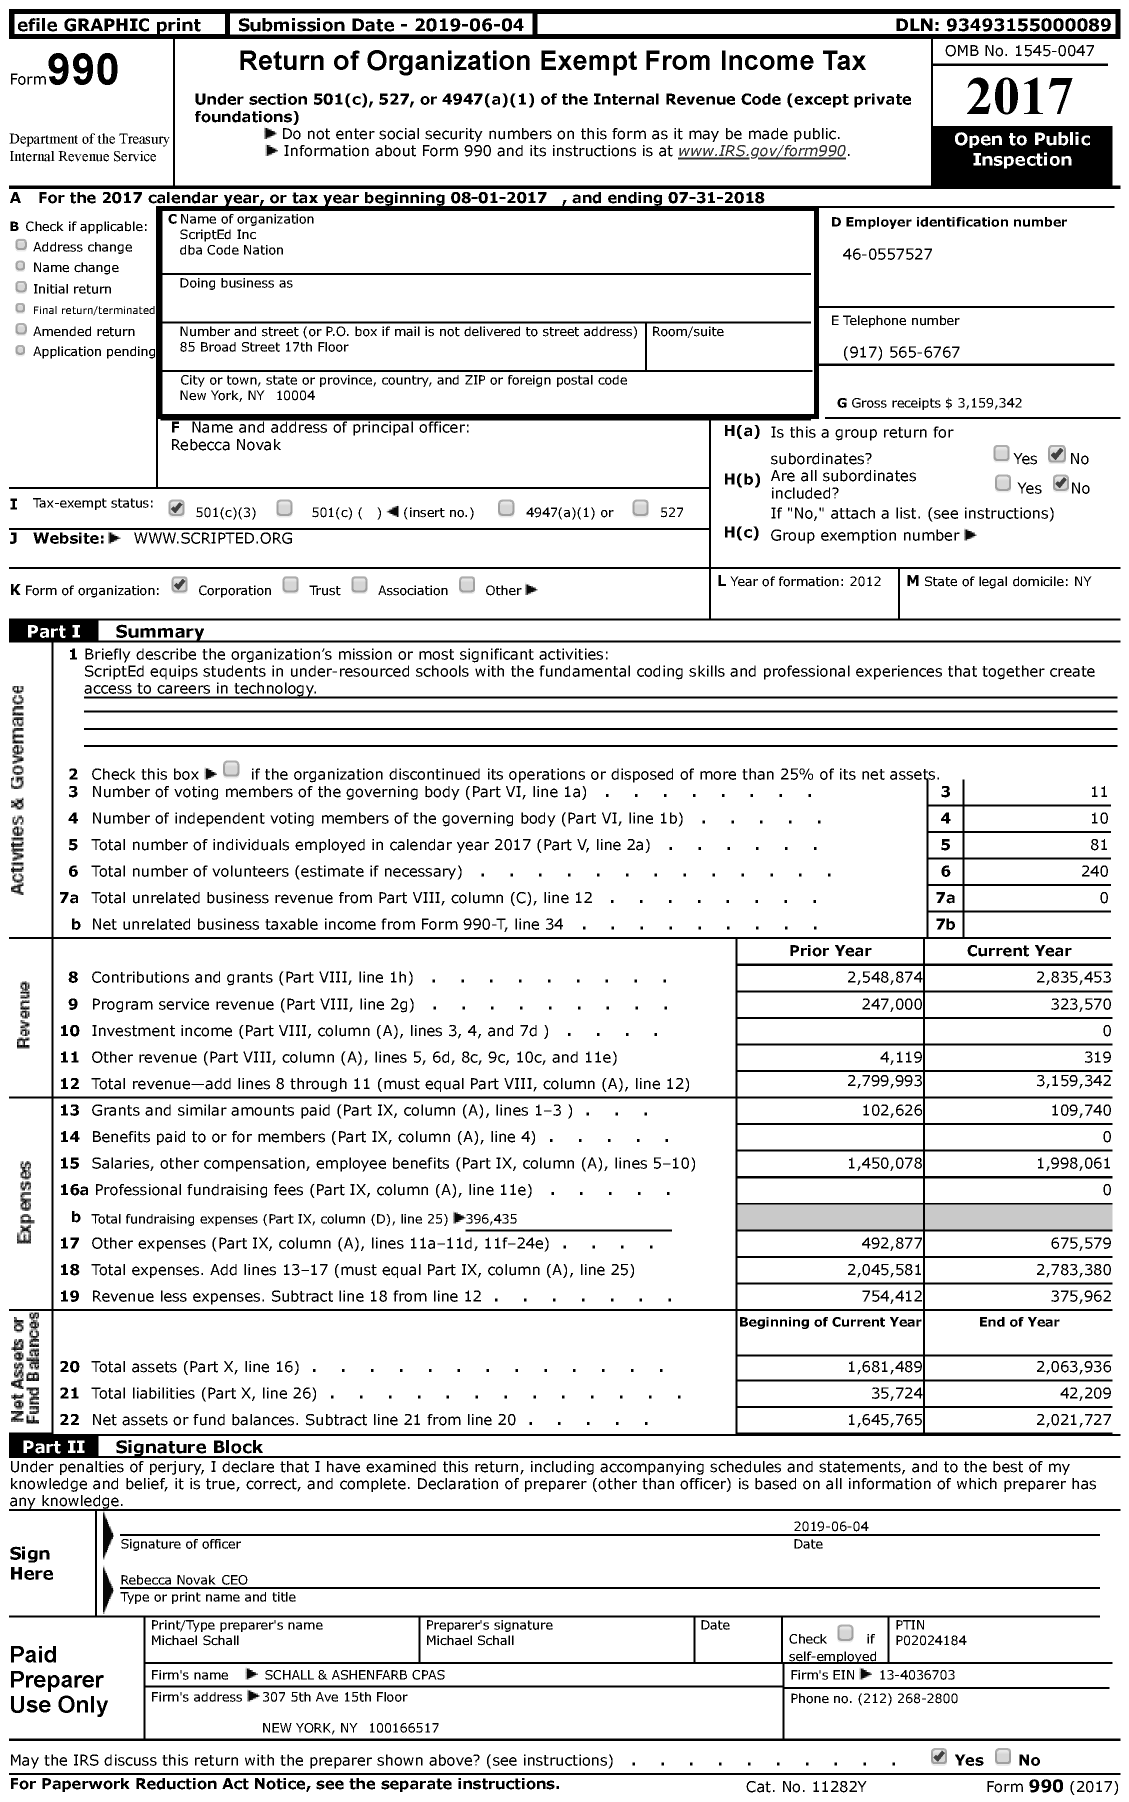 Image of first page of 2017 Form 990 for Code Nation